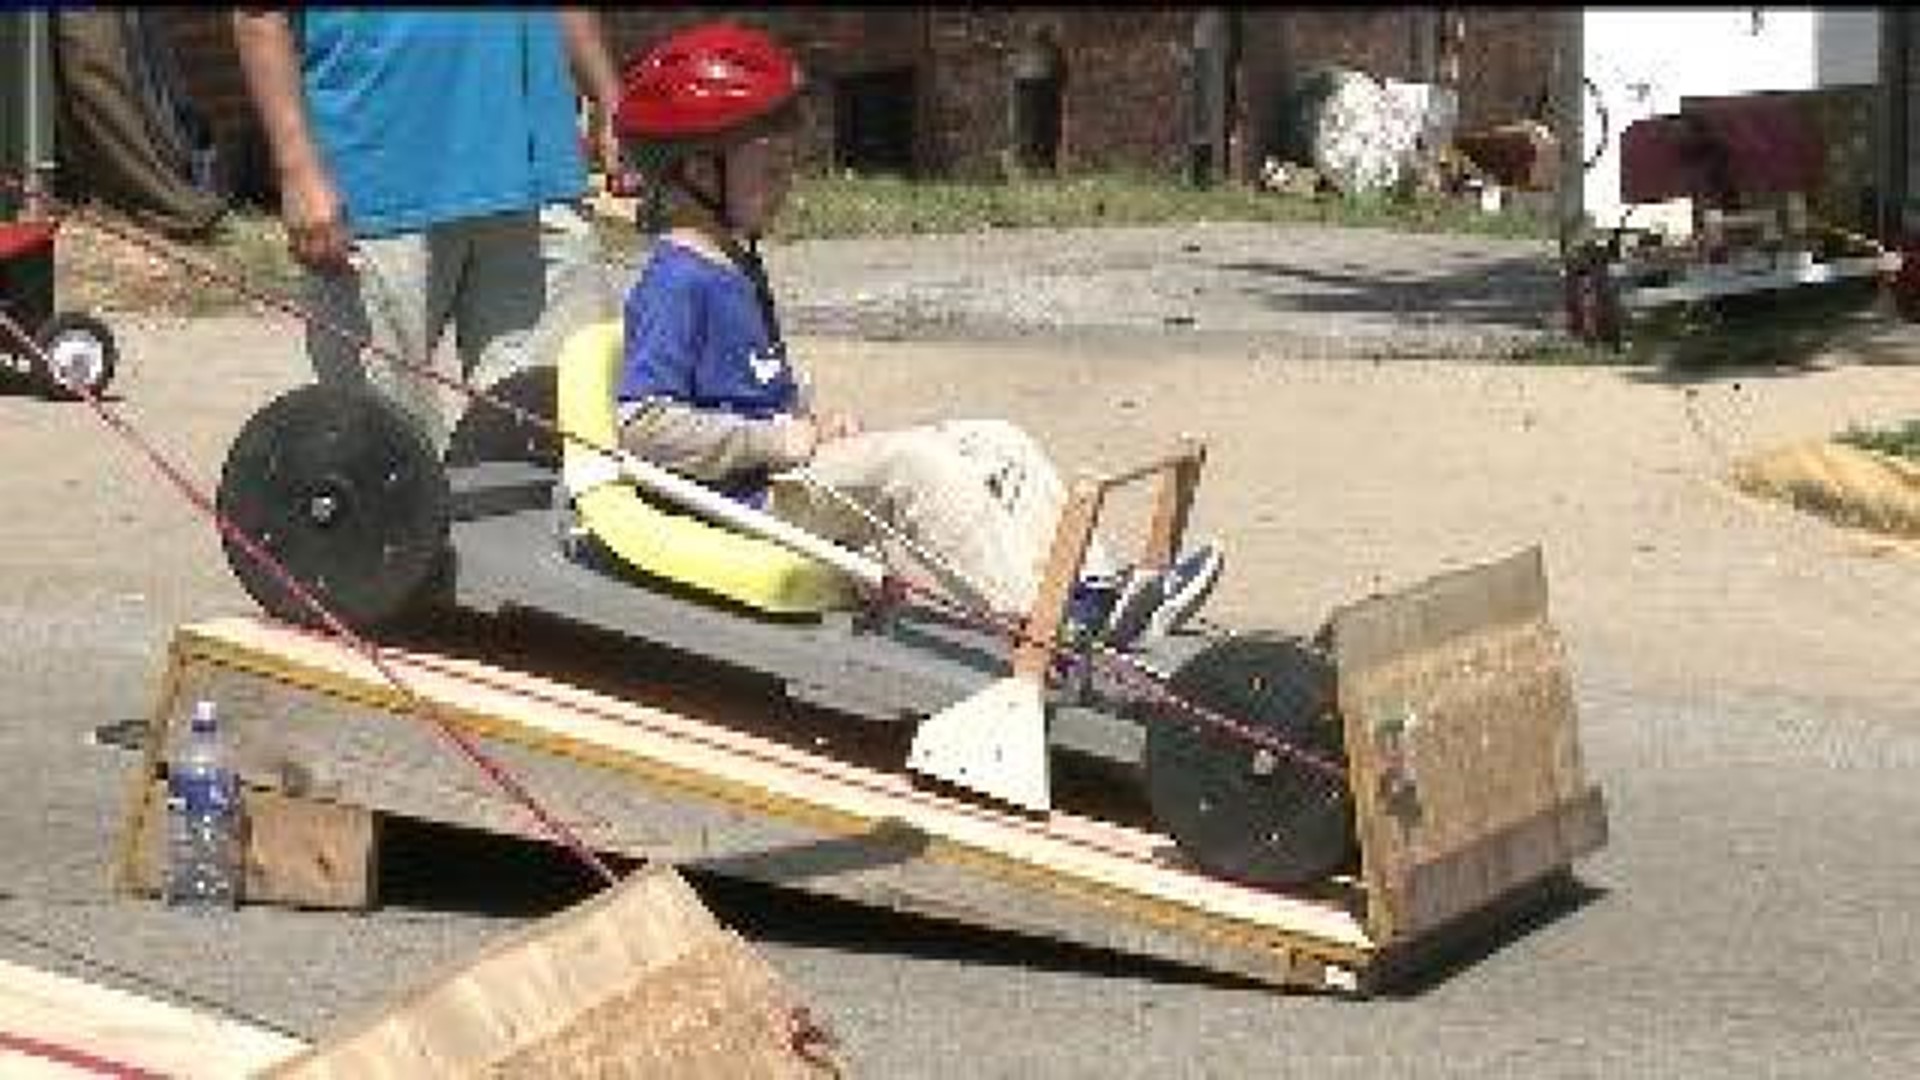 Cub Scouts race at Soap Box Derby